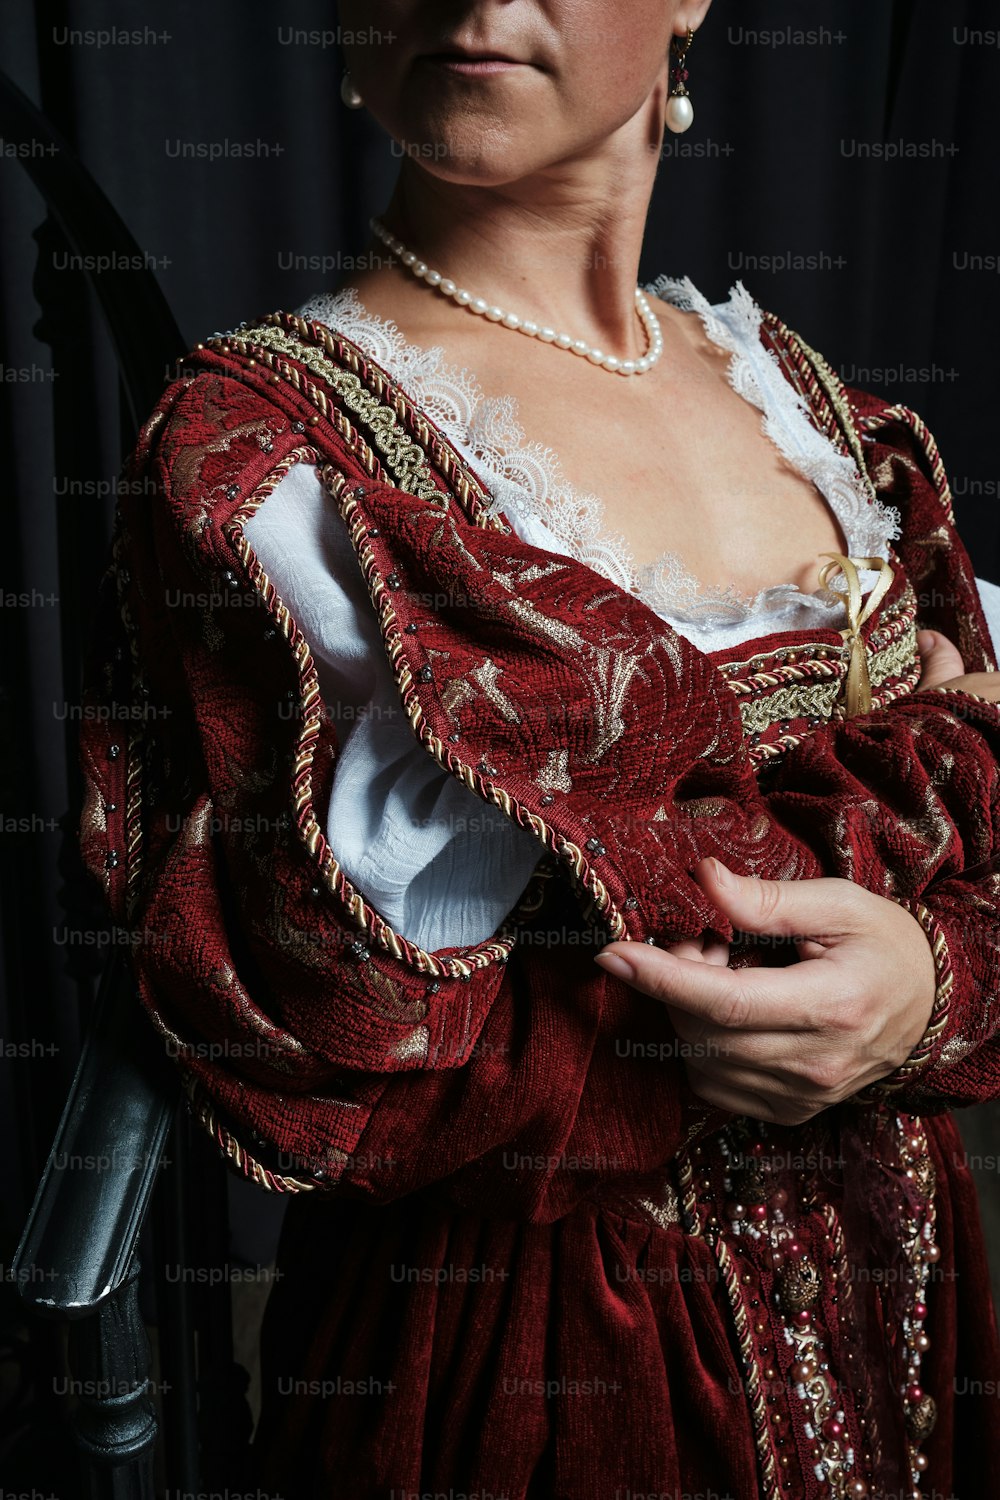 a woman wearing a red dress and pearls